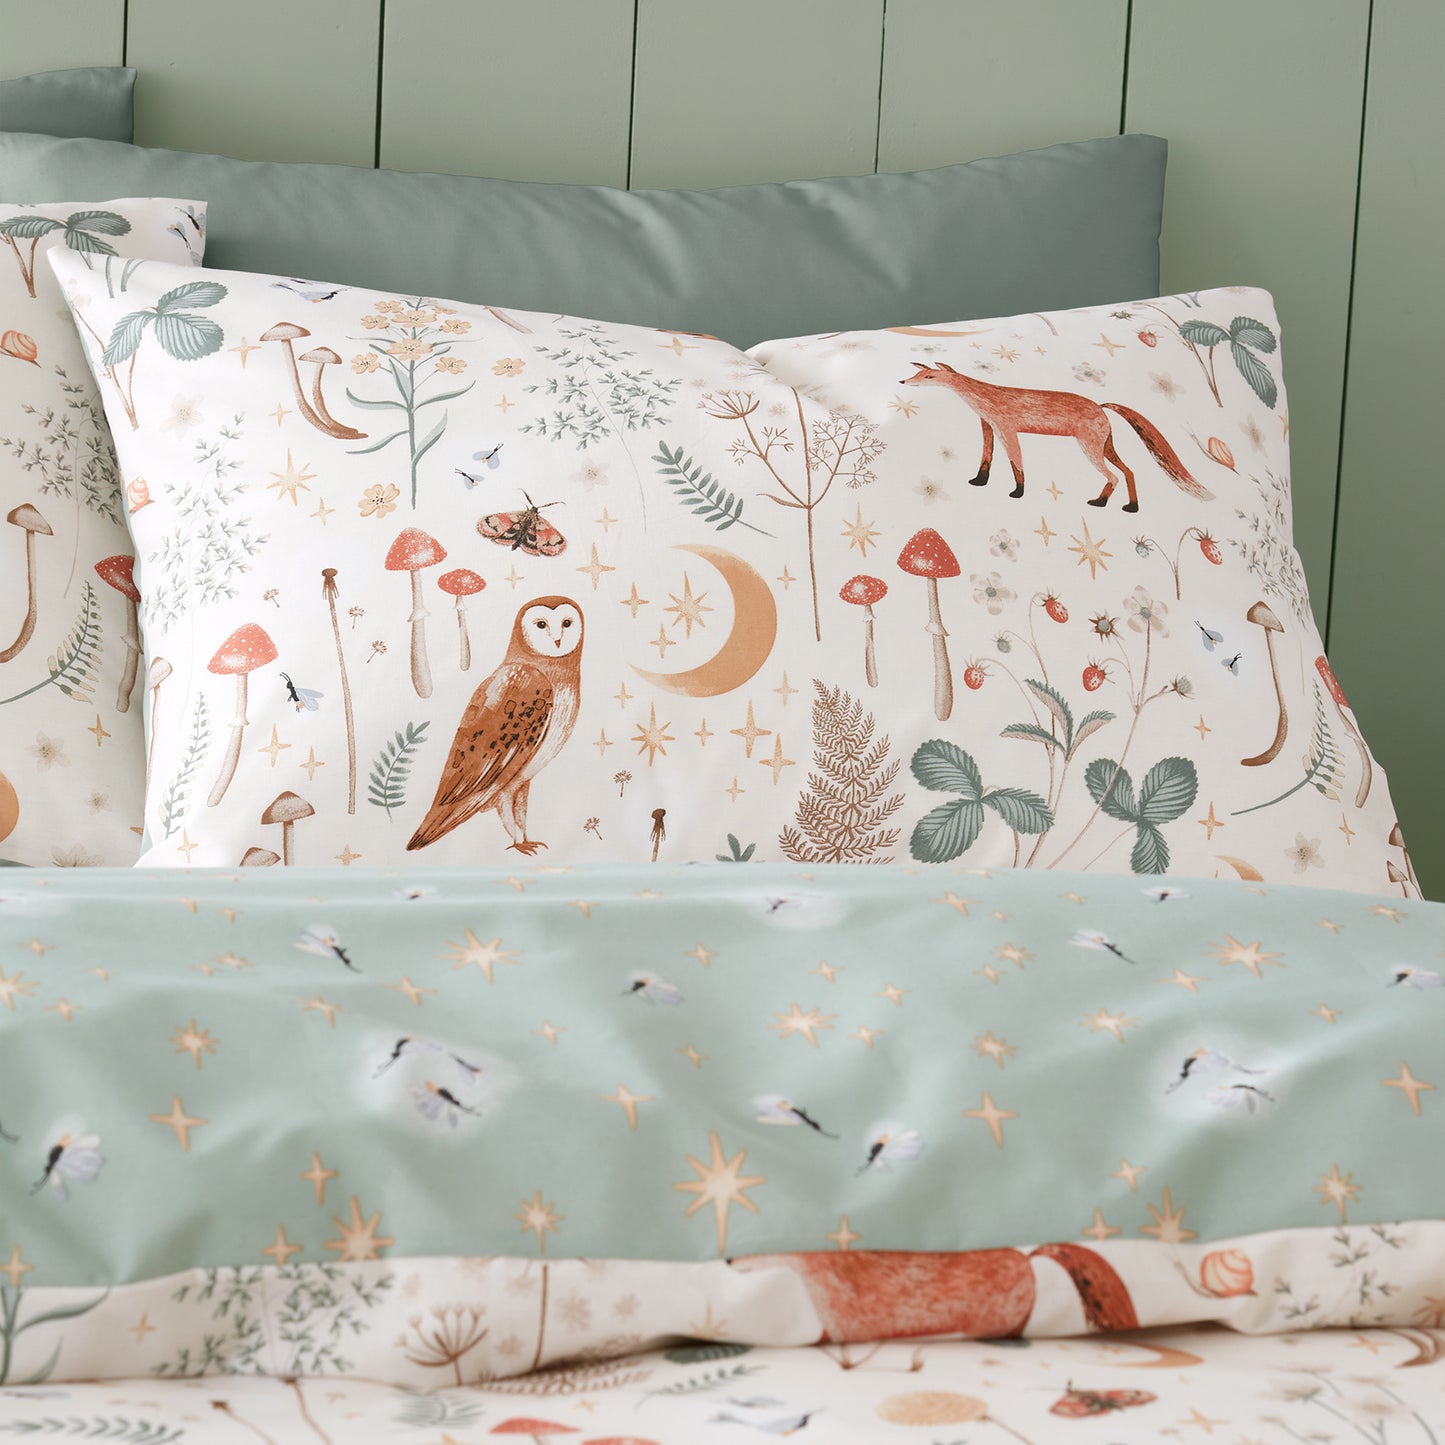 Enchanted Twilight Natural Duvet Cover Set - Catherine Lansfield